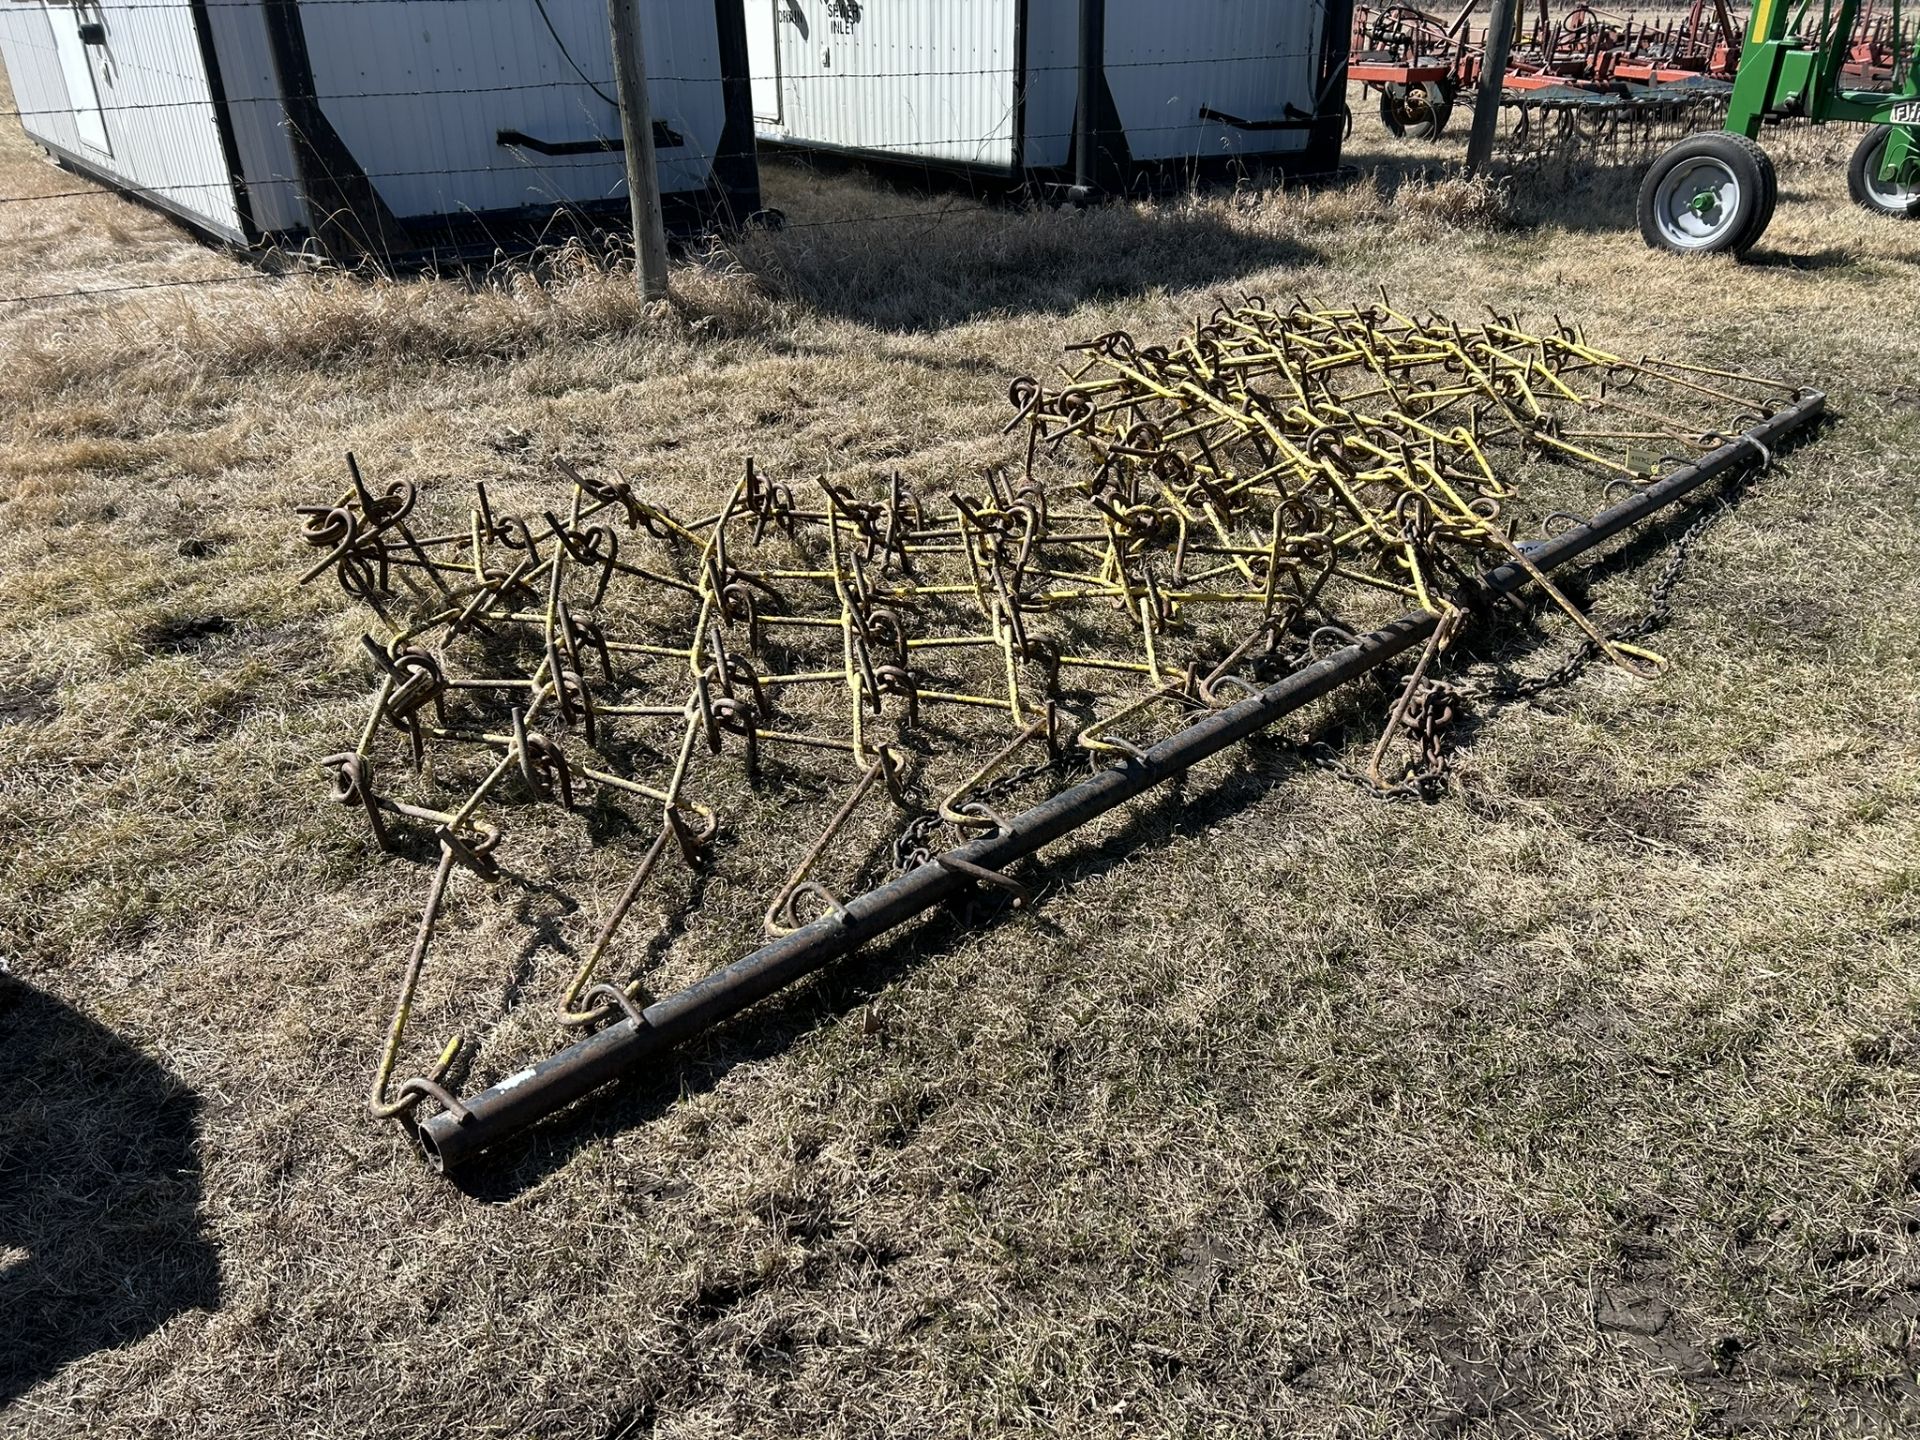 SET OF PASTURE CHAIN HARROWS W/ DRAW BAR - 15 FT - Image 2 of 4